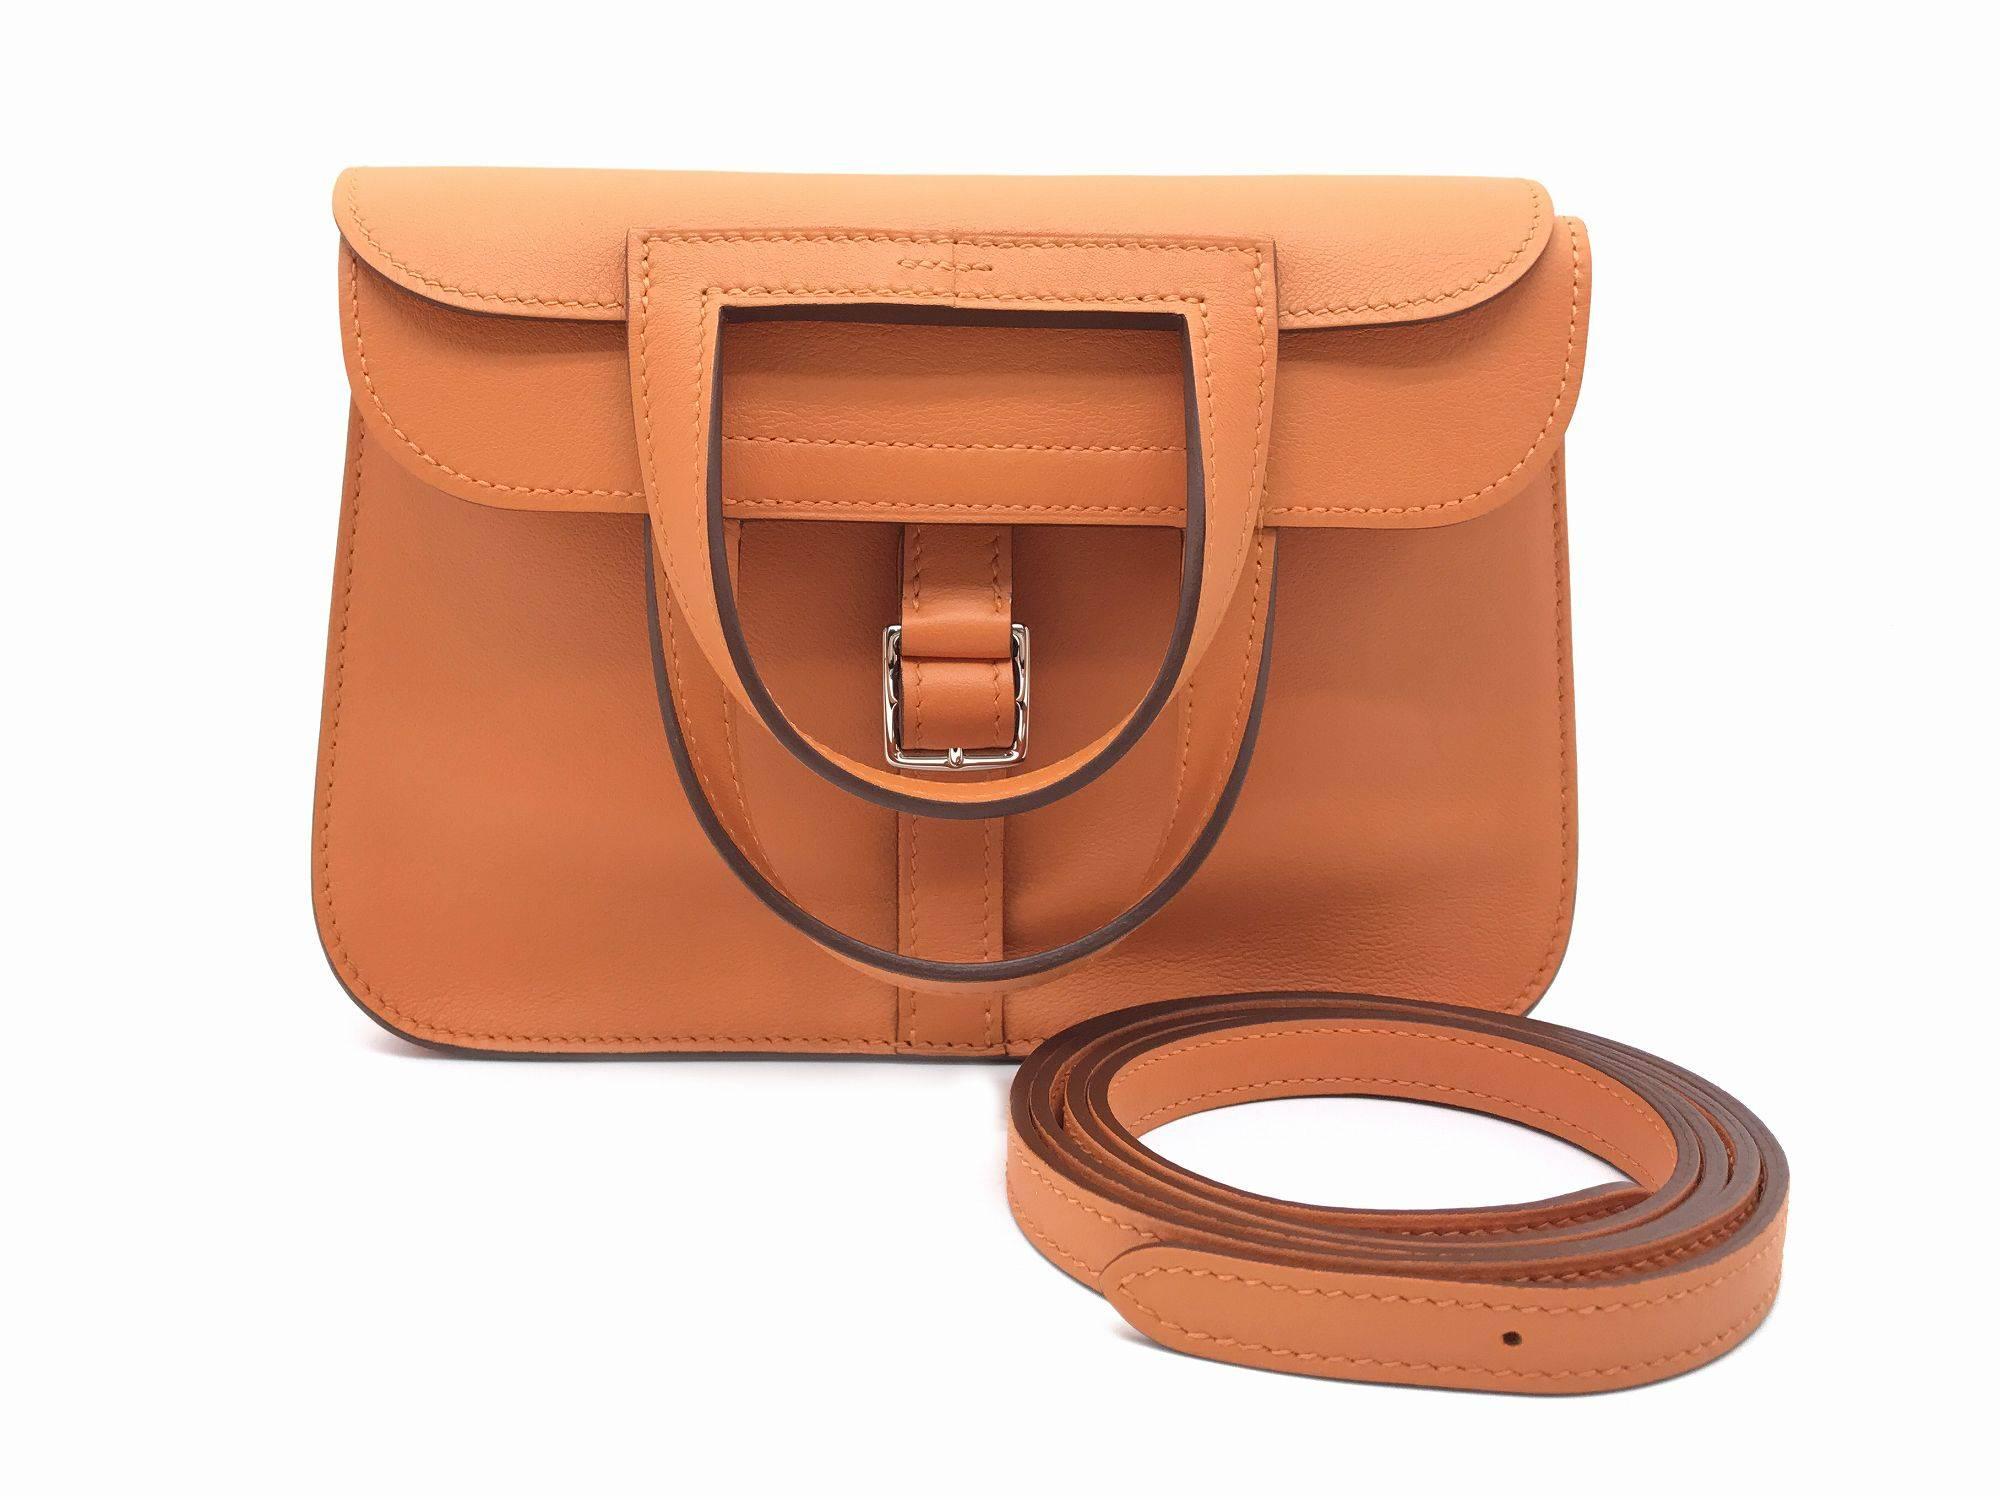 Color: Orange 

Material: Swift Leather

Condition: Rank N 
Overall: Brand New
Surface: Good
Corners: Good
Edges: Good
Handles/Straps: Good
Hardware: Good

Dimension: W21 × H15 × D6.5cm（W8.2" × H5.9" ×